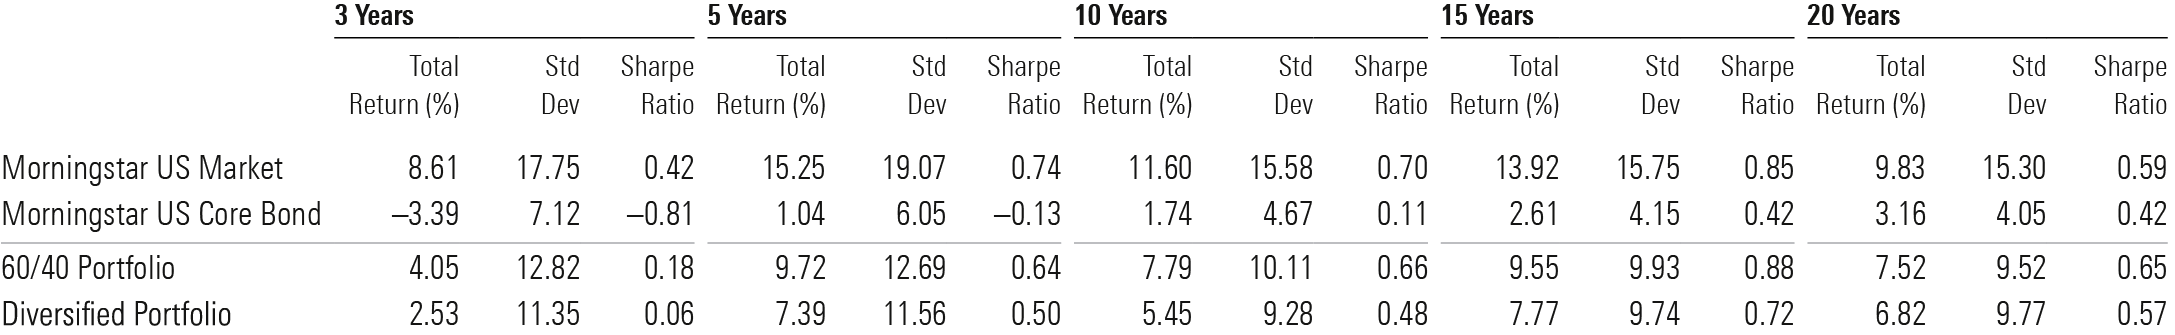 A table showing risk and return metrics for stocks, bonds, a 60/40 portfolio, and a broadly diversified portfolio over trailing periods up to 20 years.